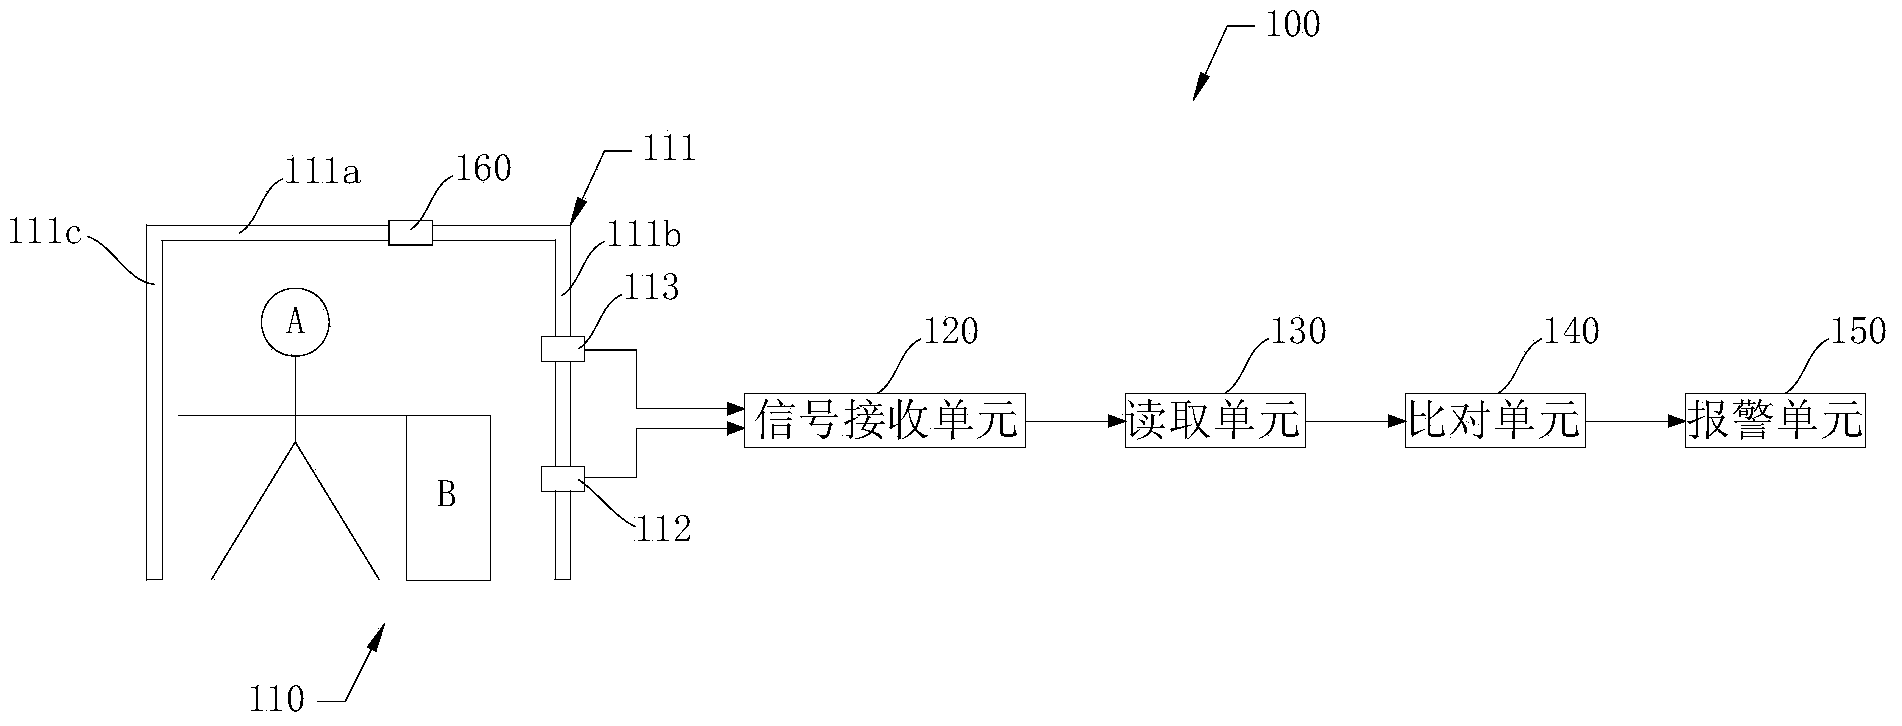 Compound scanning and image recording based safe picking system and method for airport luggage